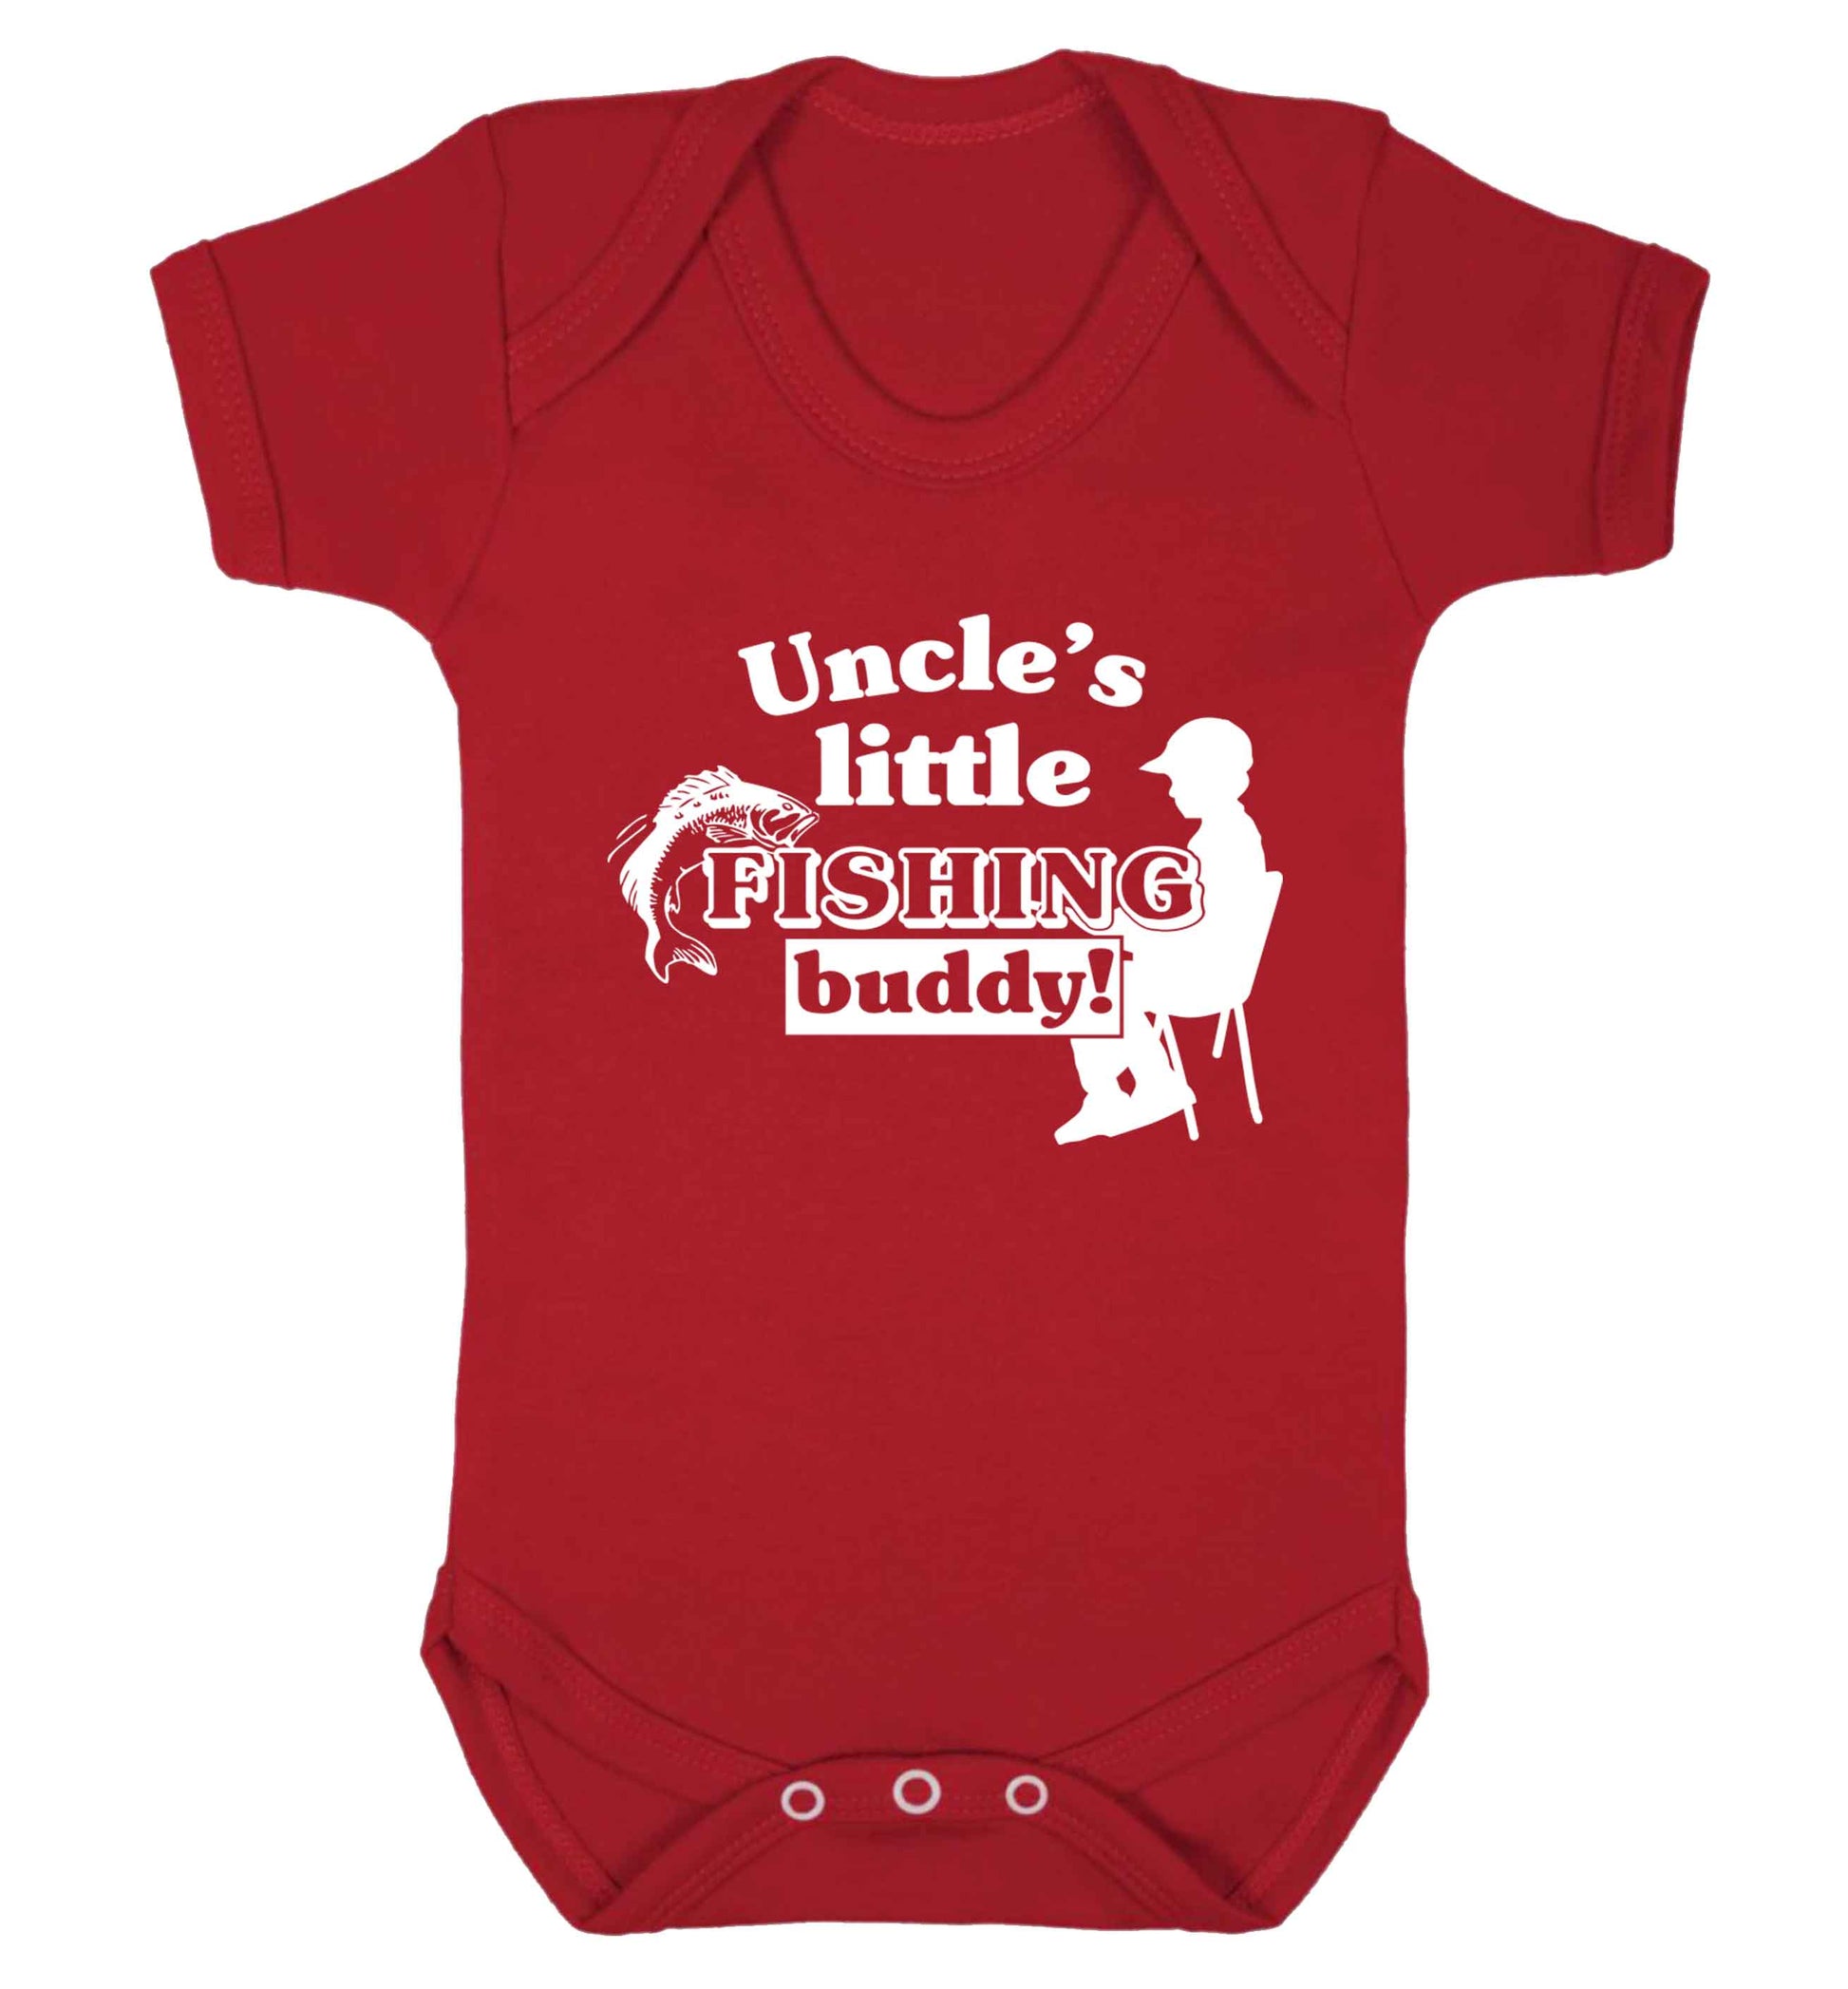 Uncle's little fishing buddy Baby Vest red 18-24 months